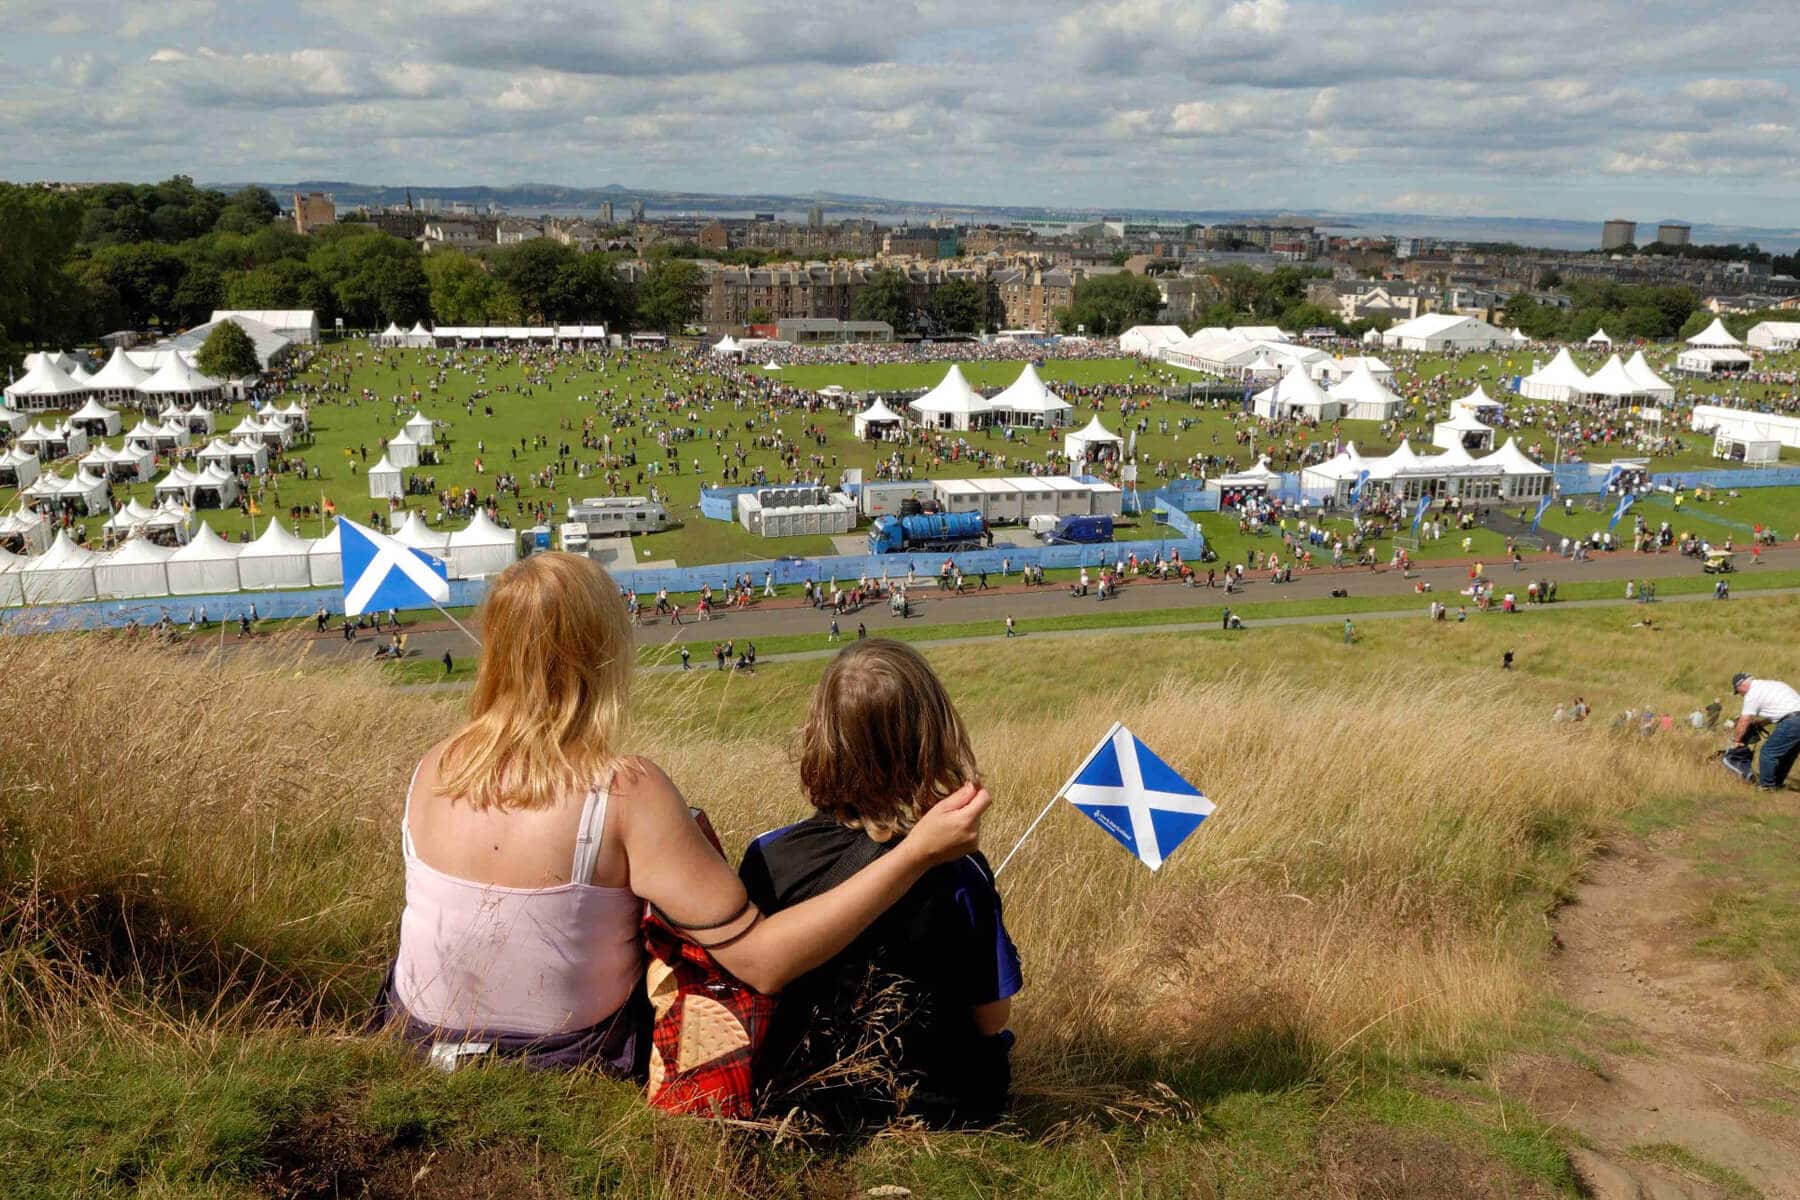 A photo of an woman and child holding small Scottish saltire flags, sitting on a hillside watching the crowds and tents of The Gathering 2009